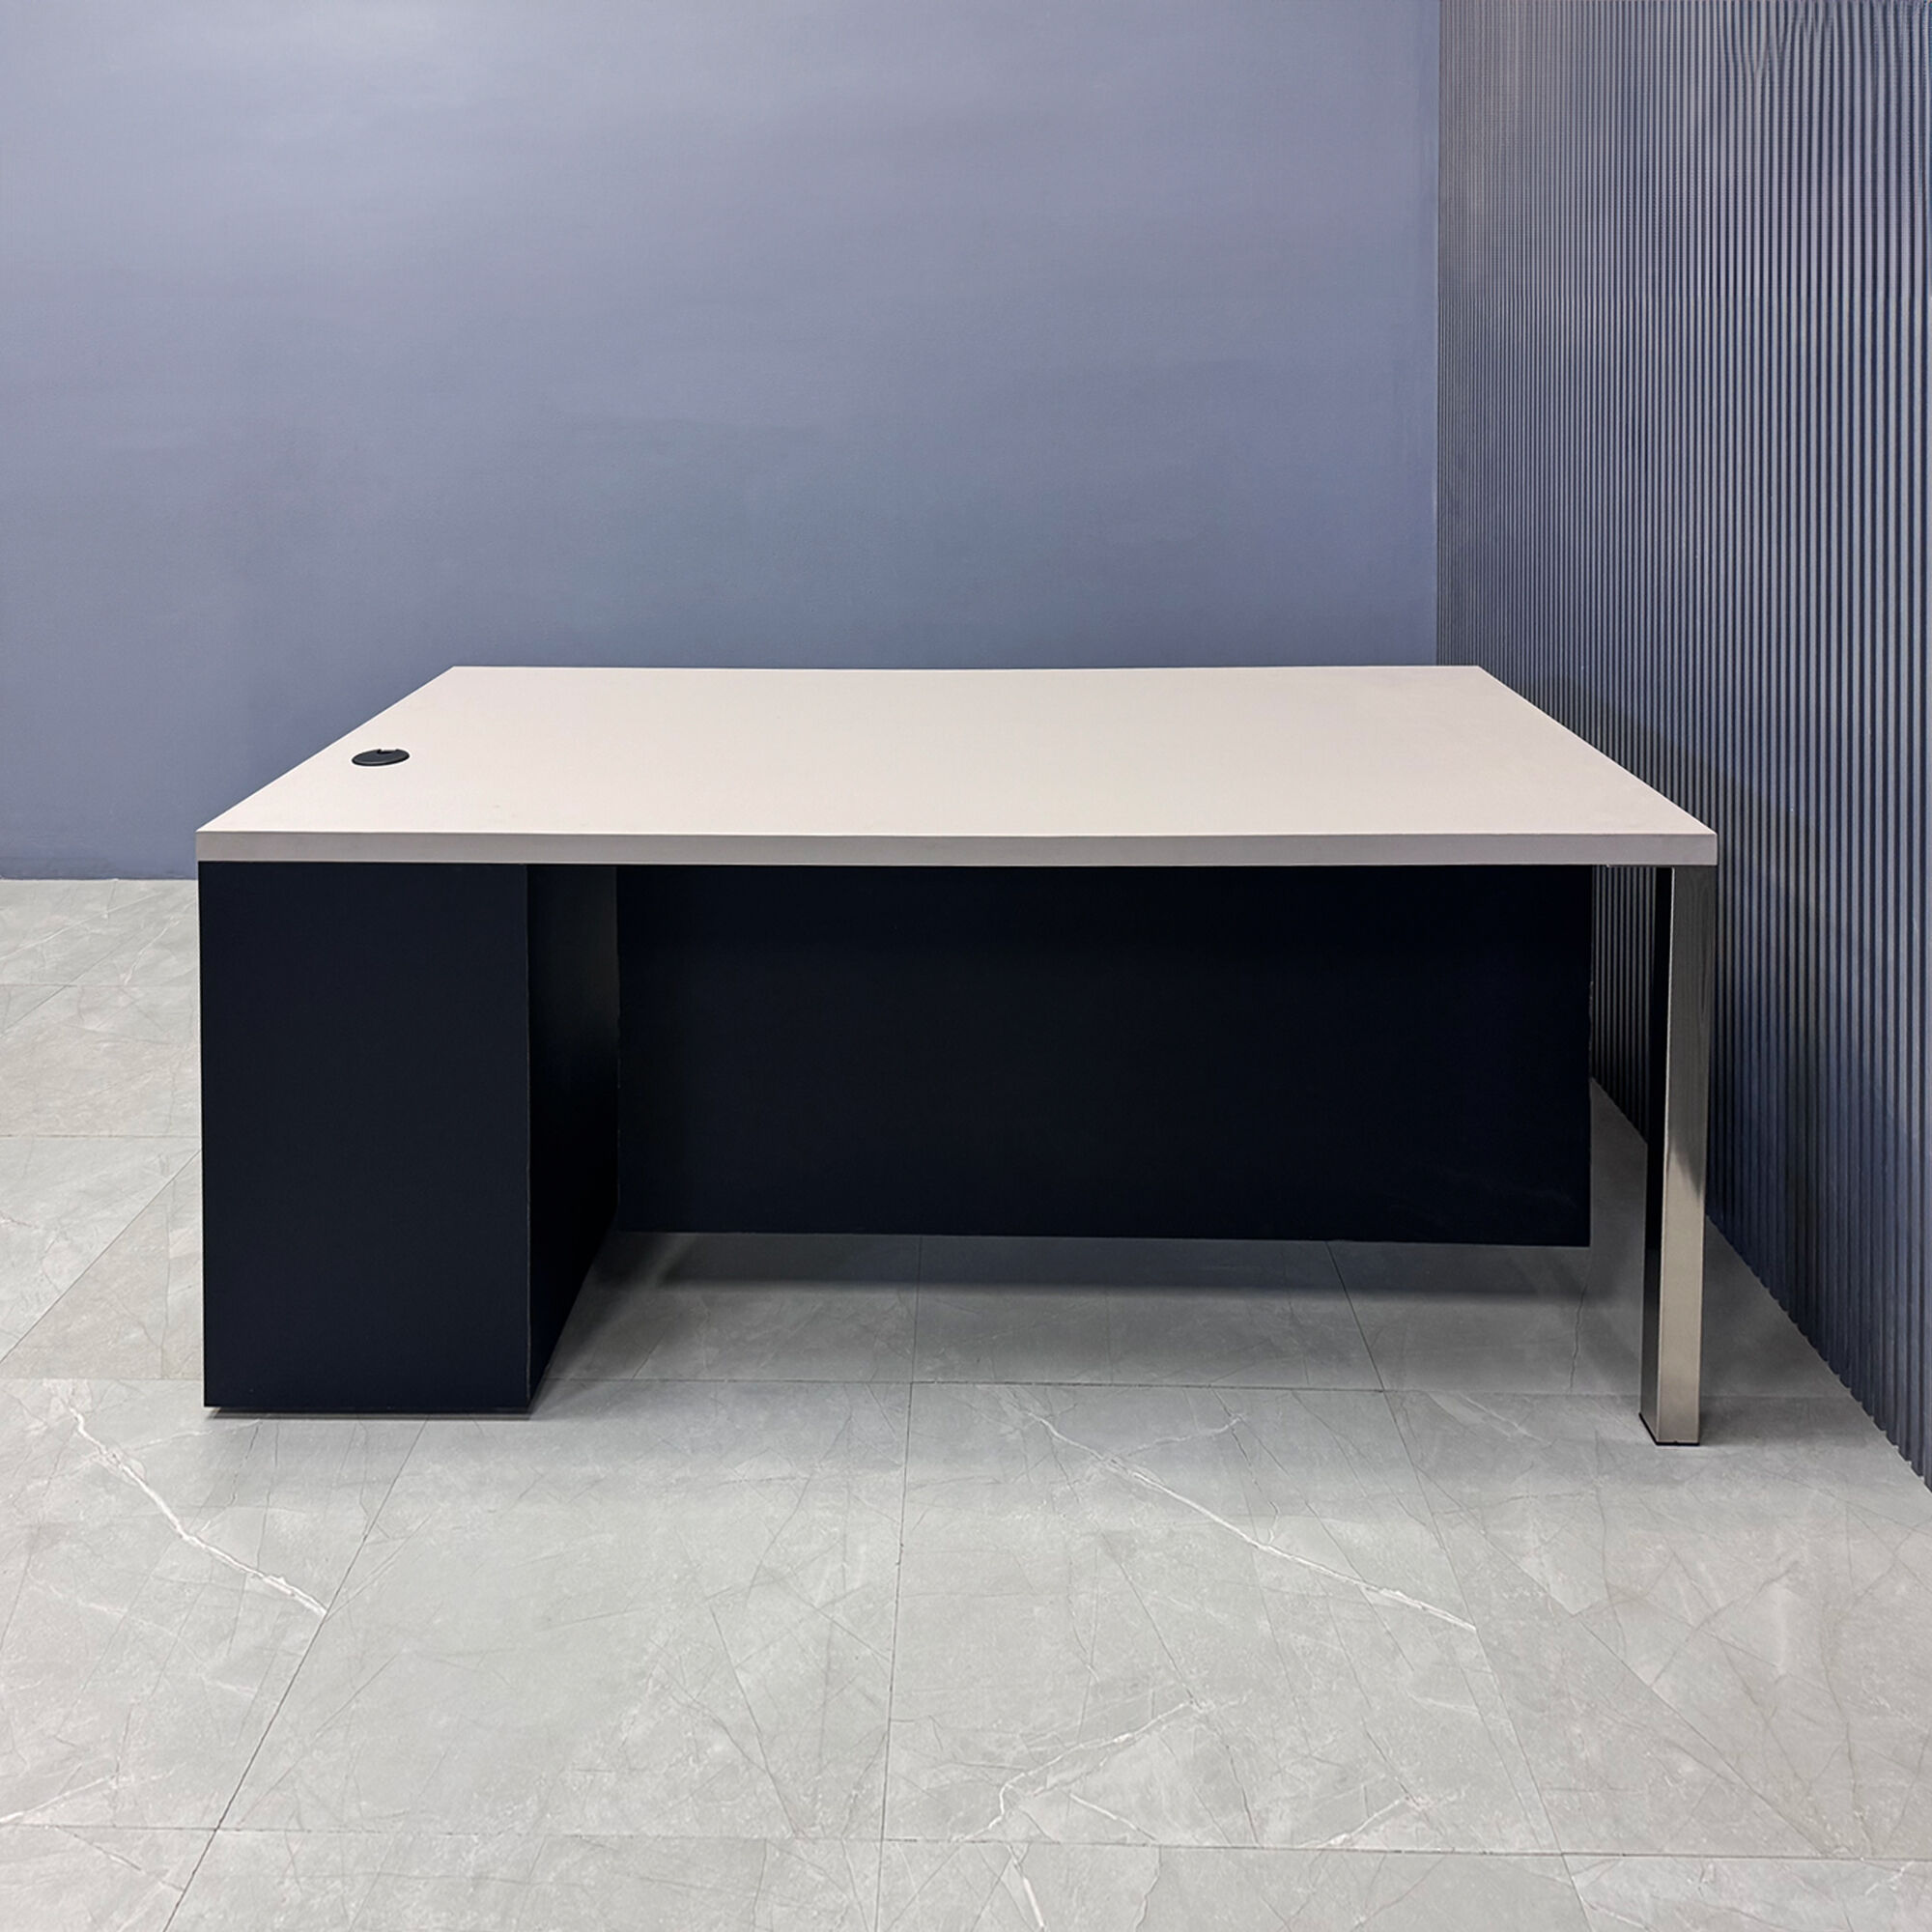 72-inch Dallas Straight Executive Desk W/ Cabinet in beige pvc top, black traceless laminate storage & privacy panel, with brushed aluminum legs, shown here.